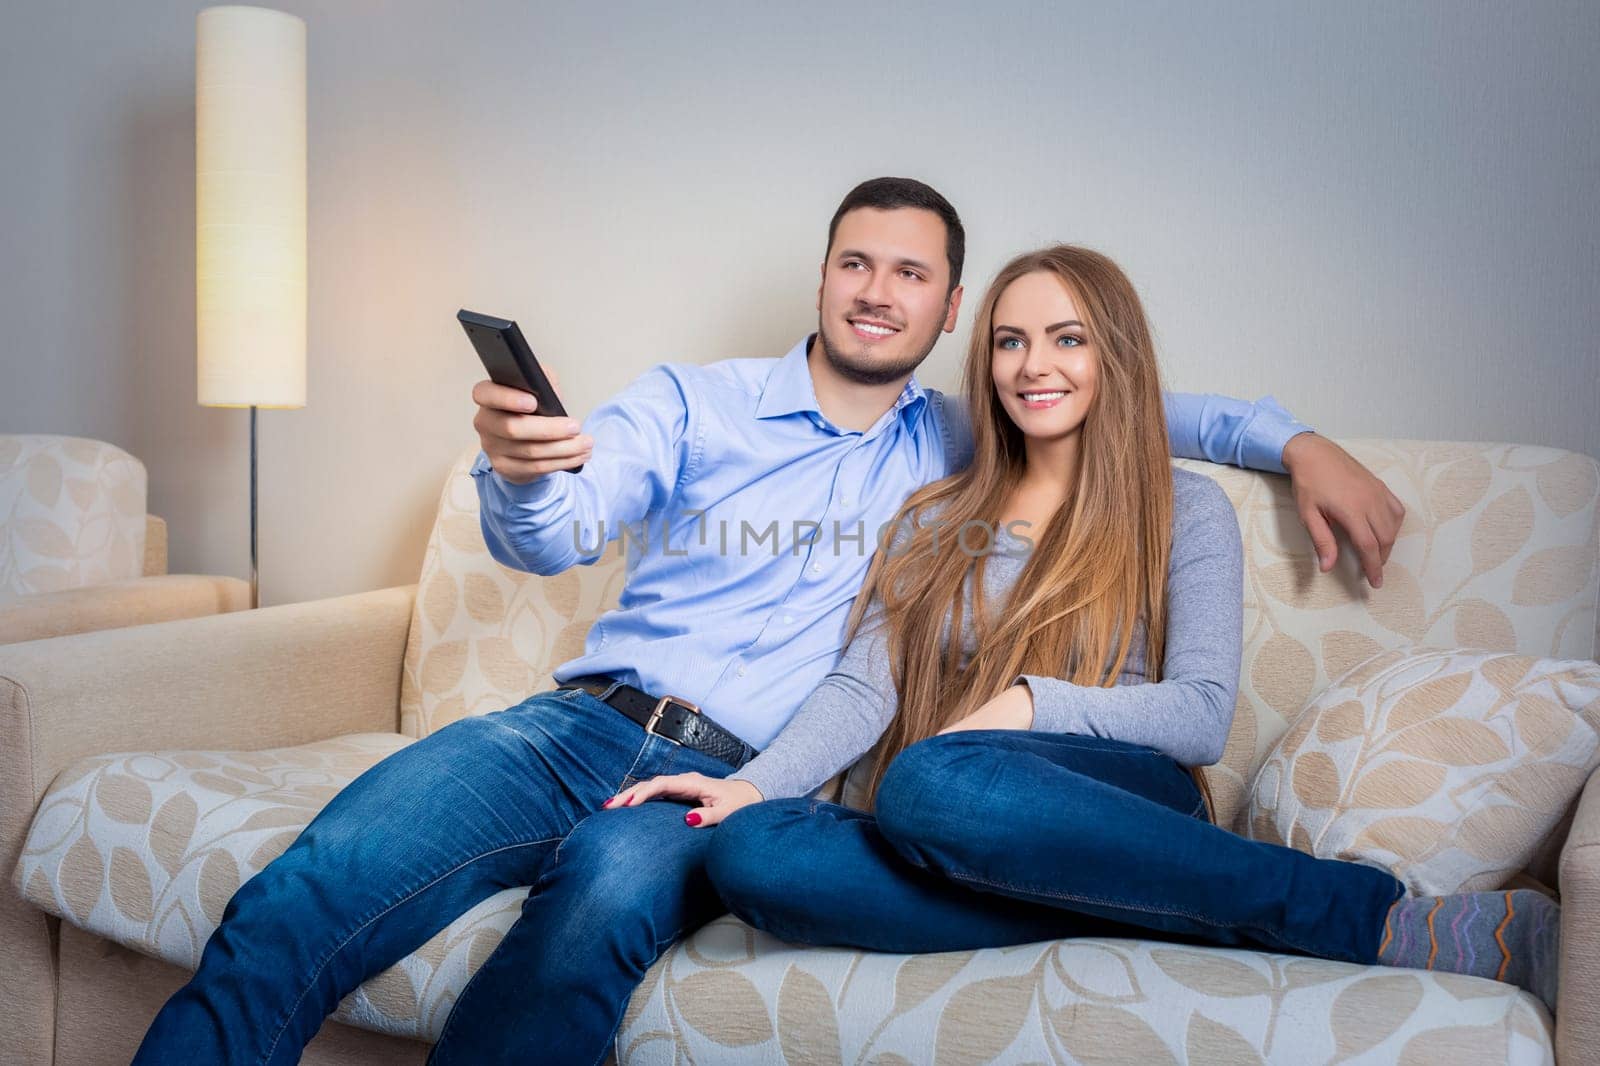 Happy couple sitting on sofa with remote control in hands and watching television together